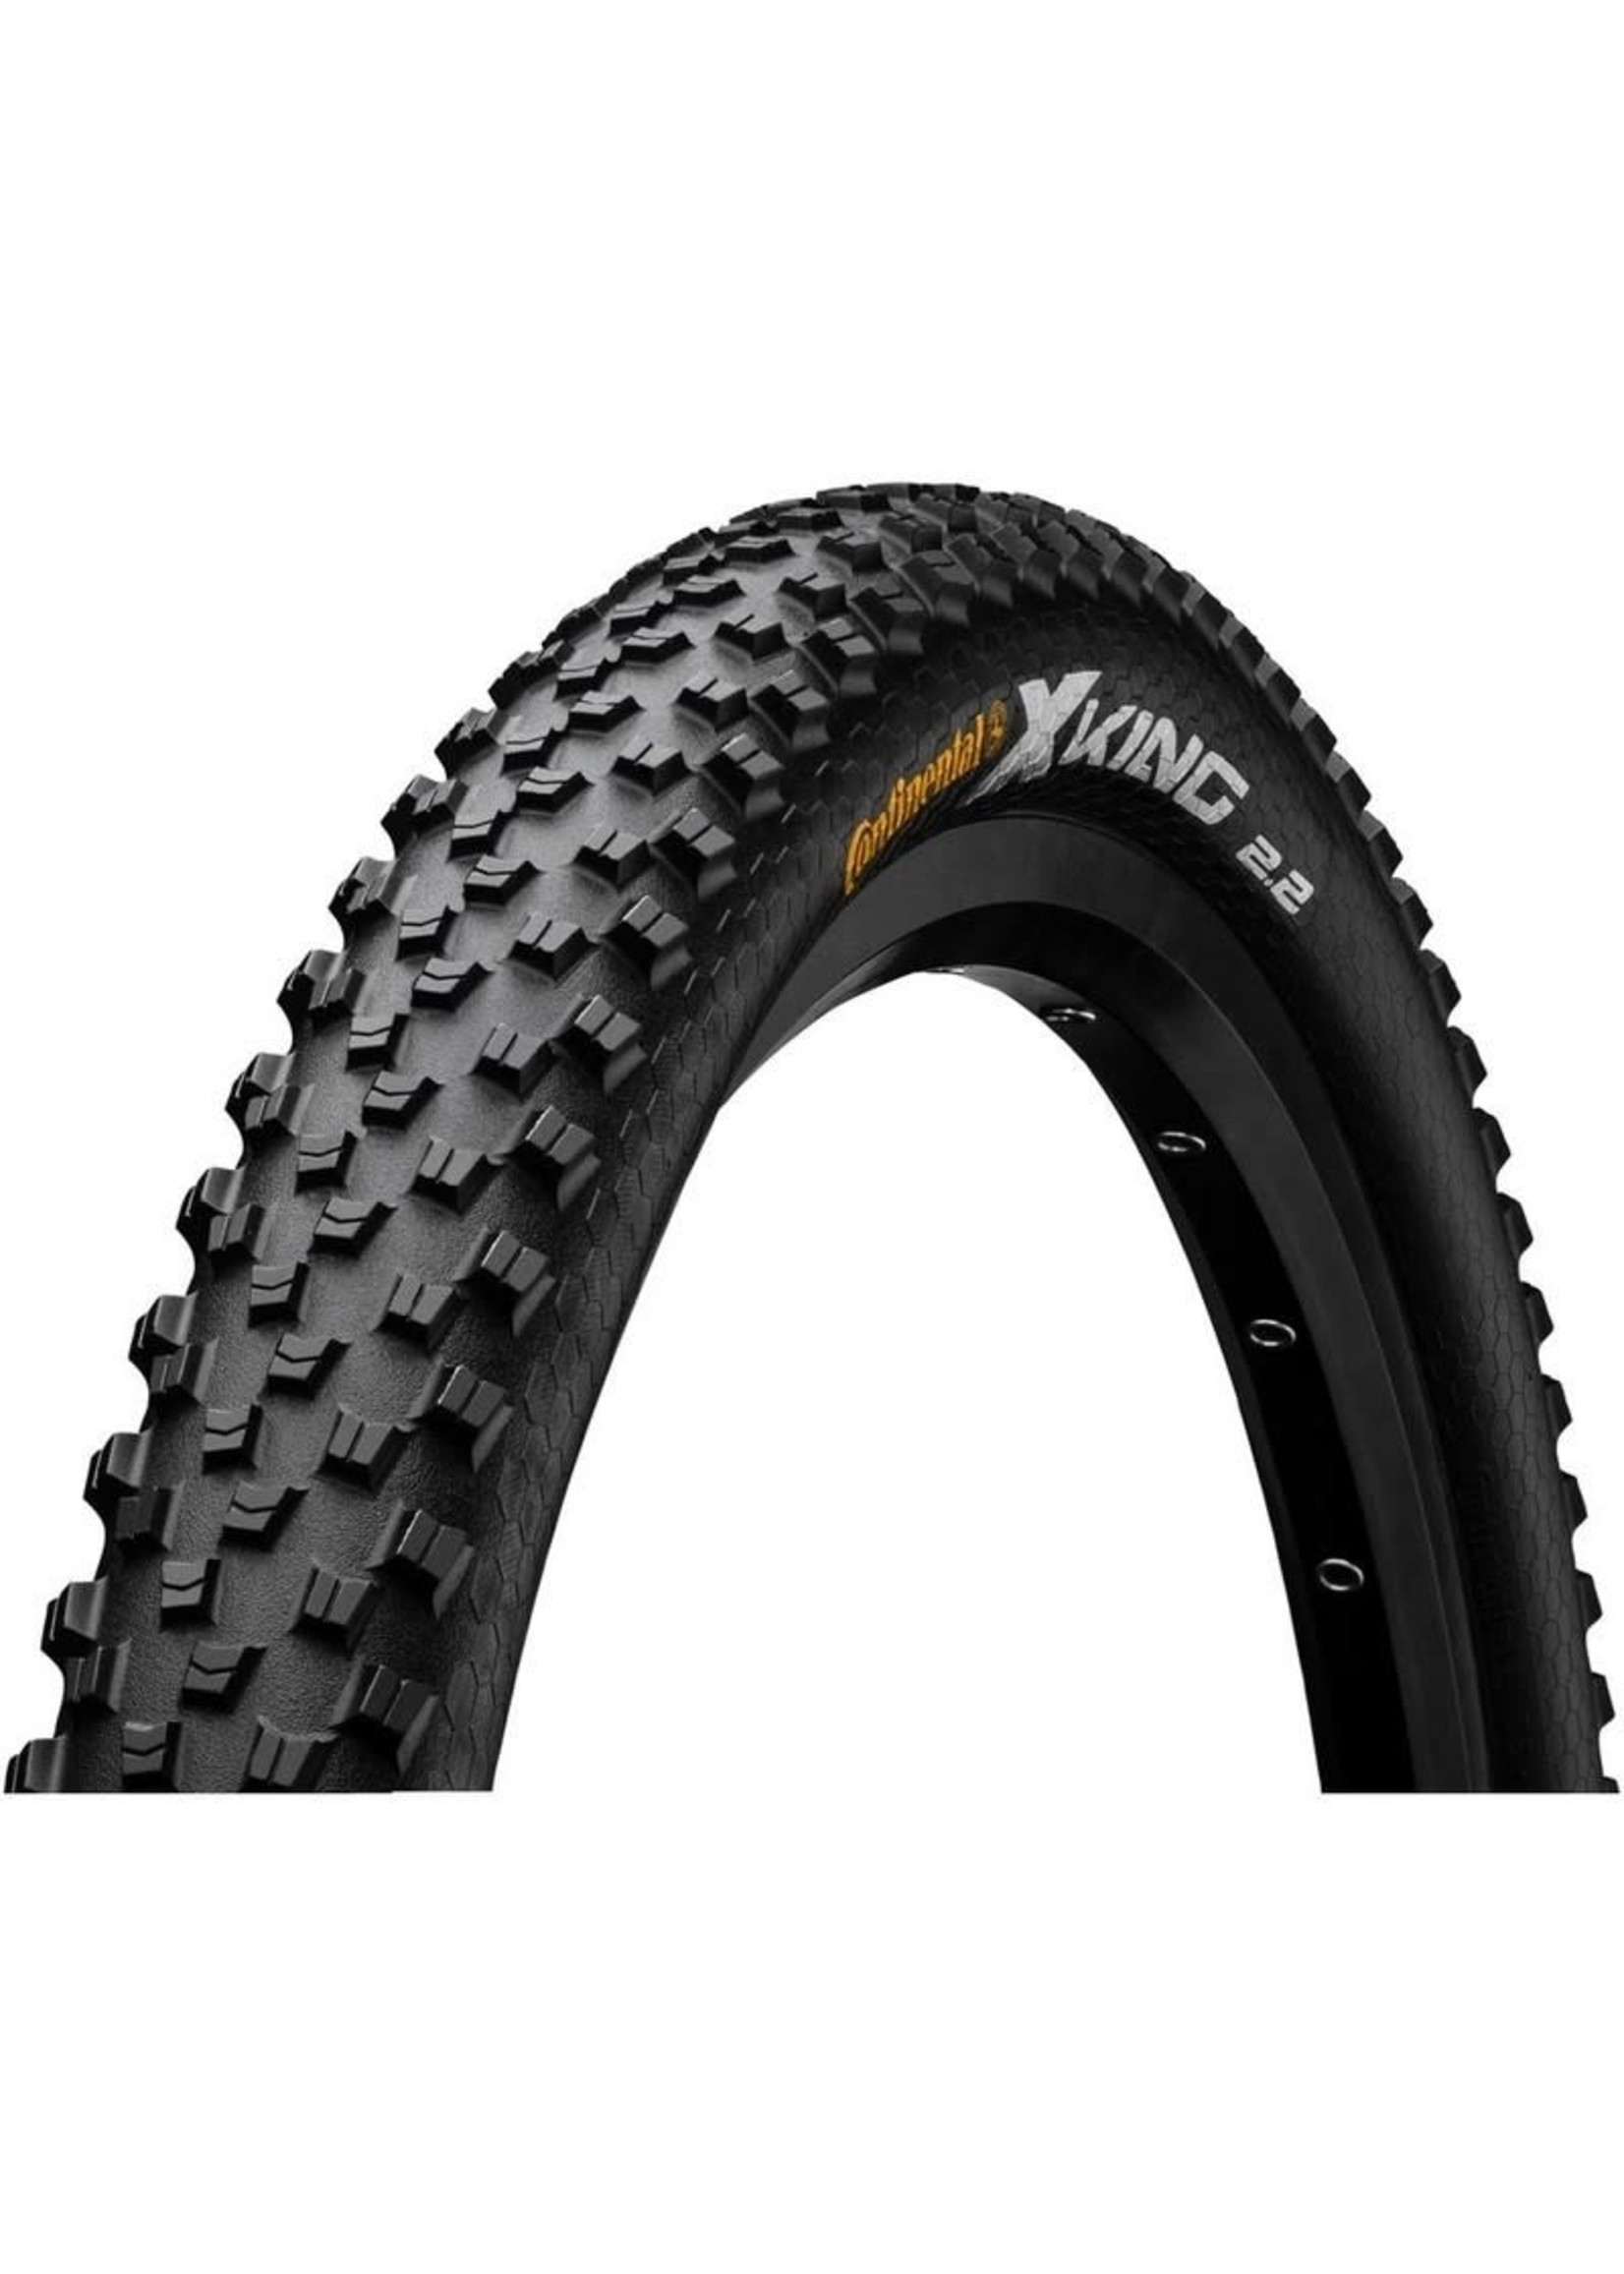 Continental Tire Continental X King 29x2.2 ProTection Folding